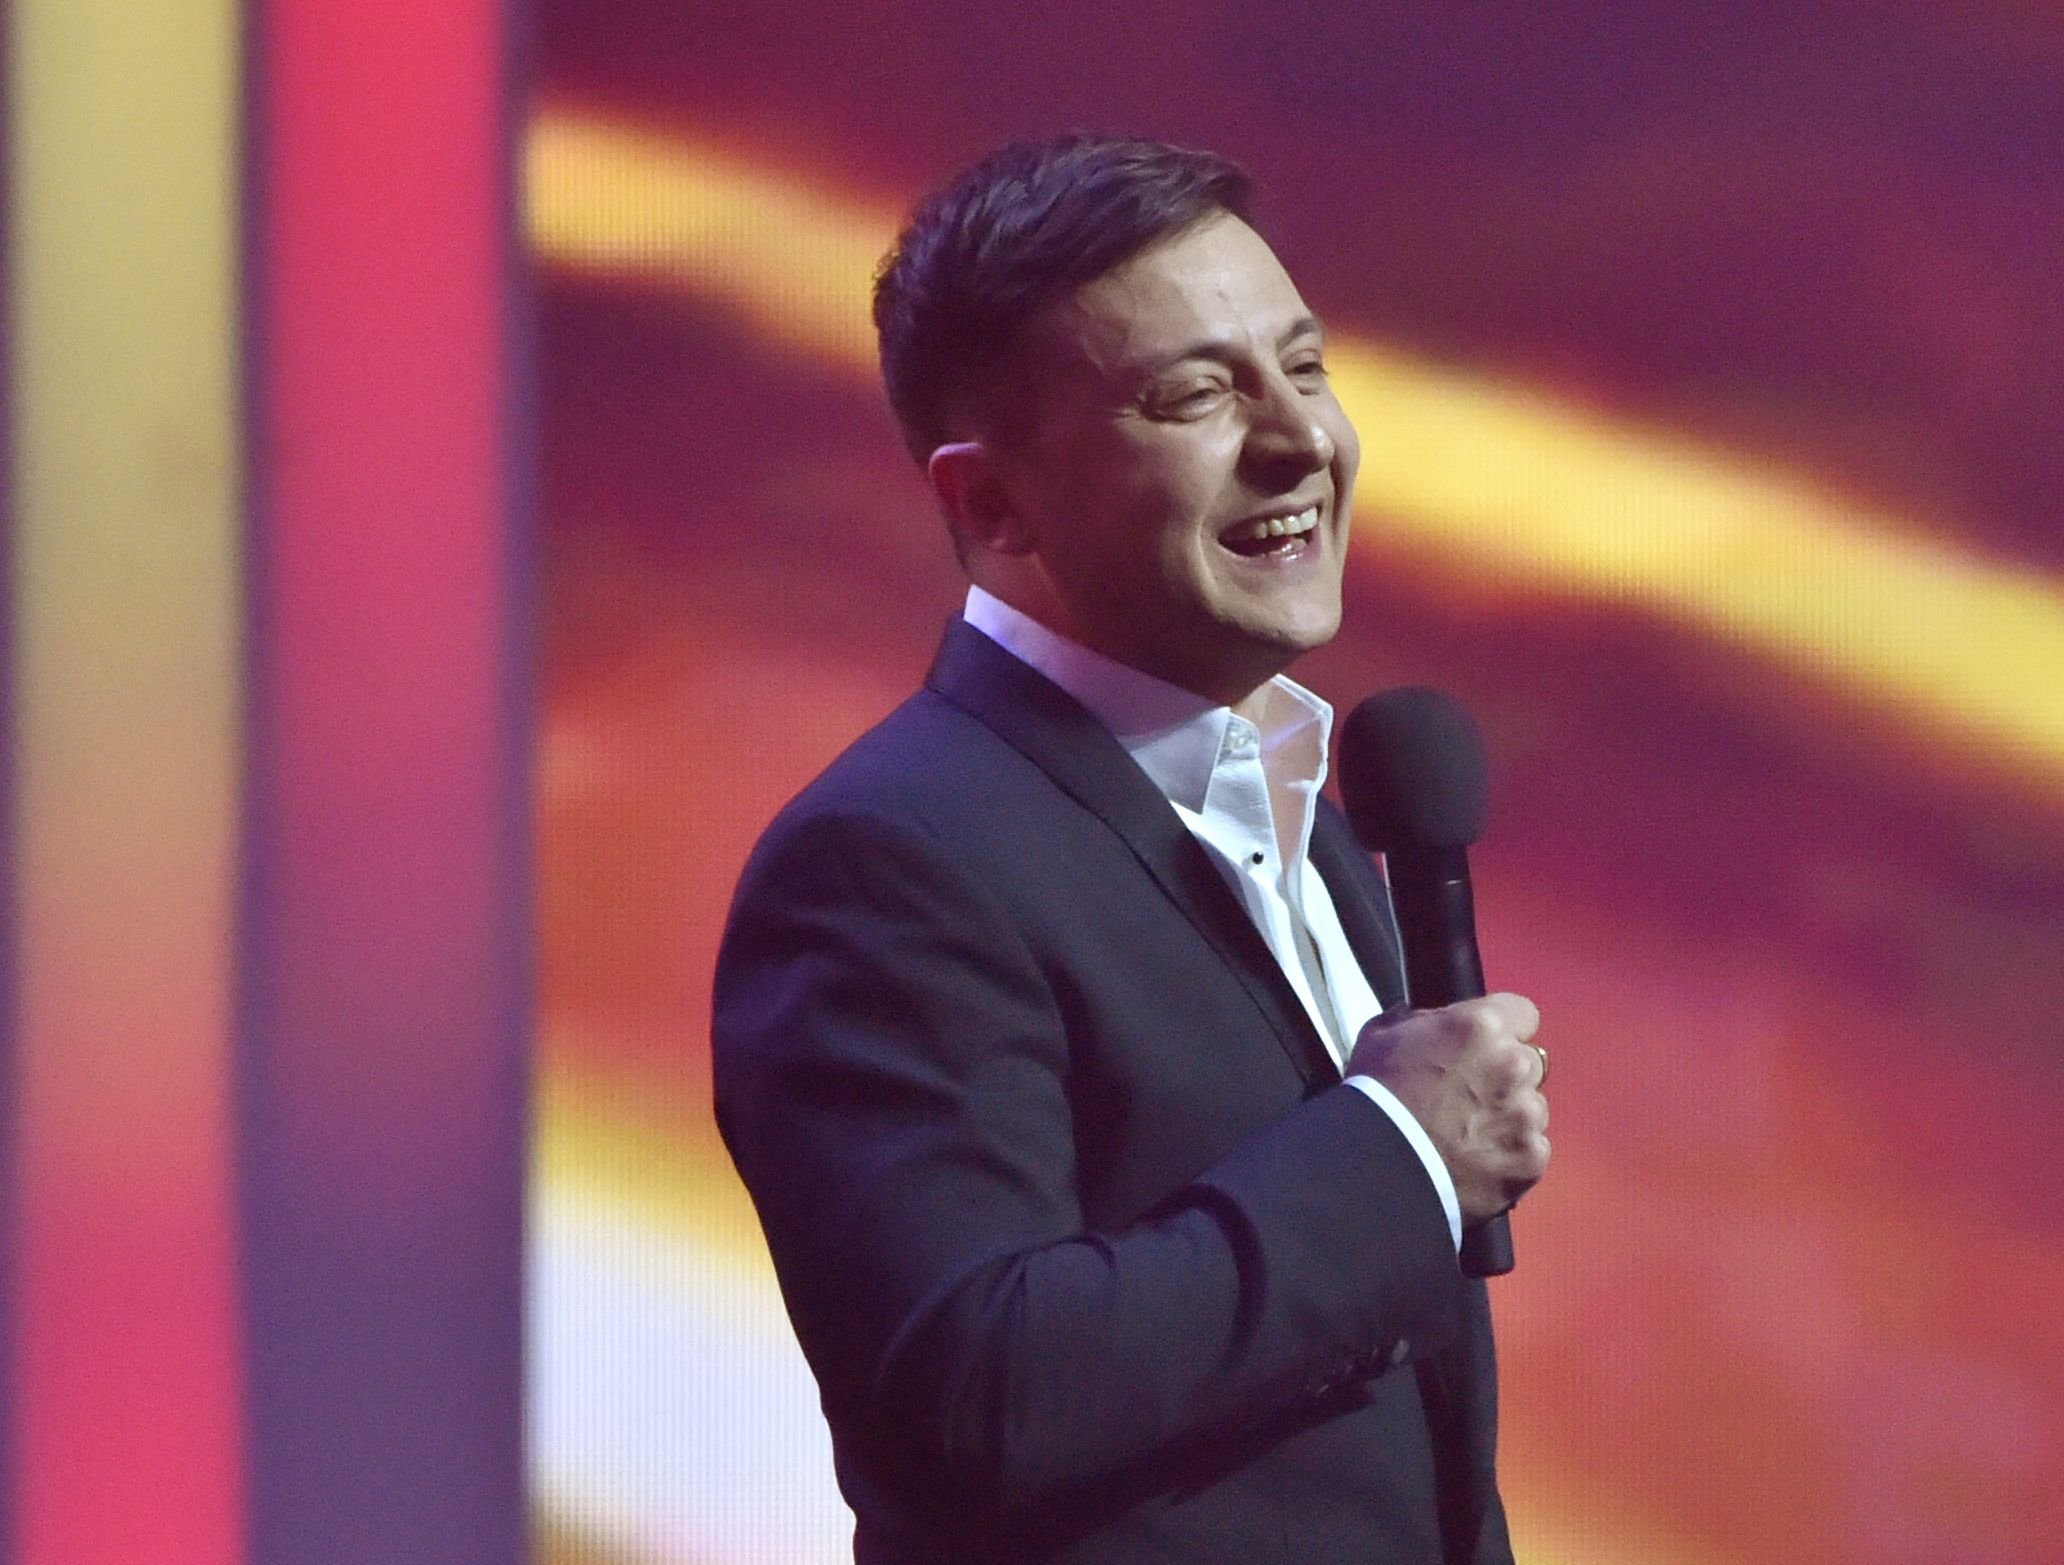 Ukrainian presidential candidate Volodymyr Zelensky performs with his "95th block" comedy group in Kiev, Ukraine, on March 13, 2019. | Source: Sergei Supinsky/AFP/Getty Images